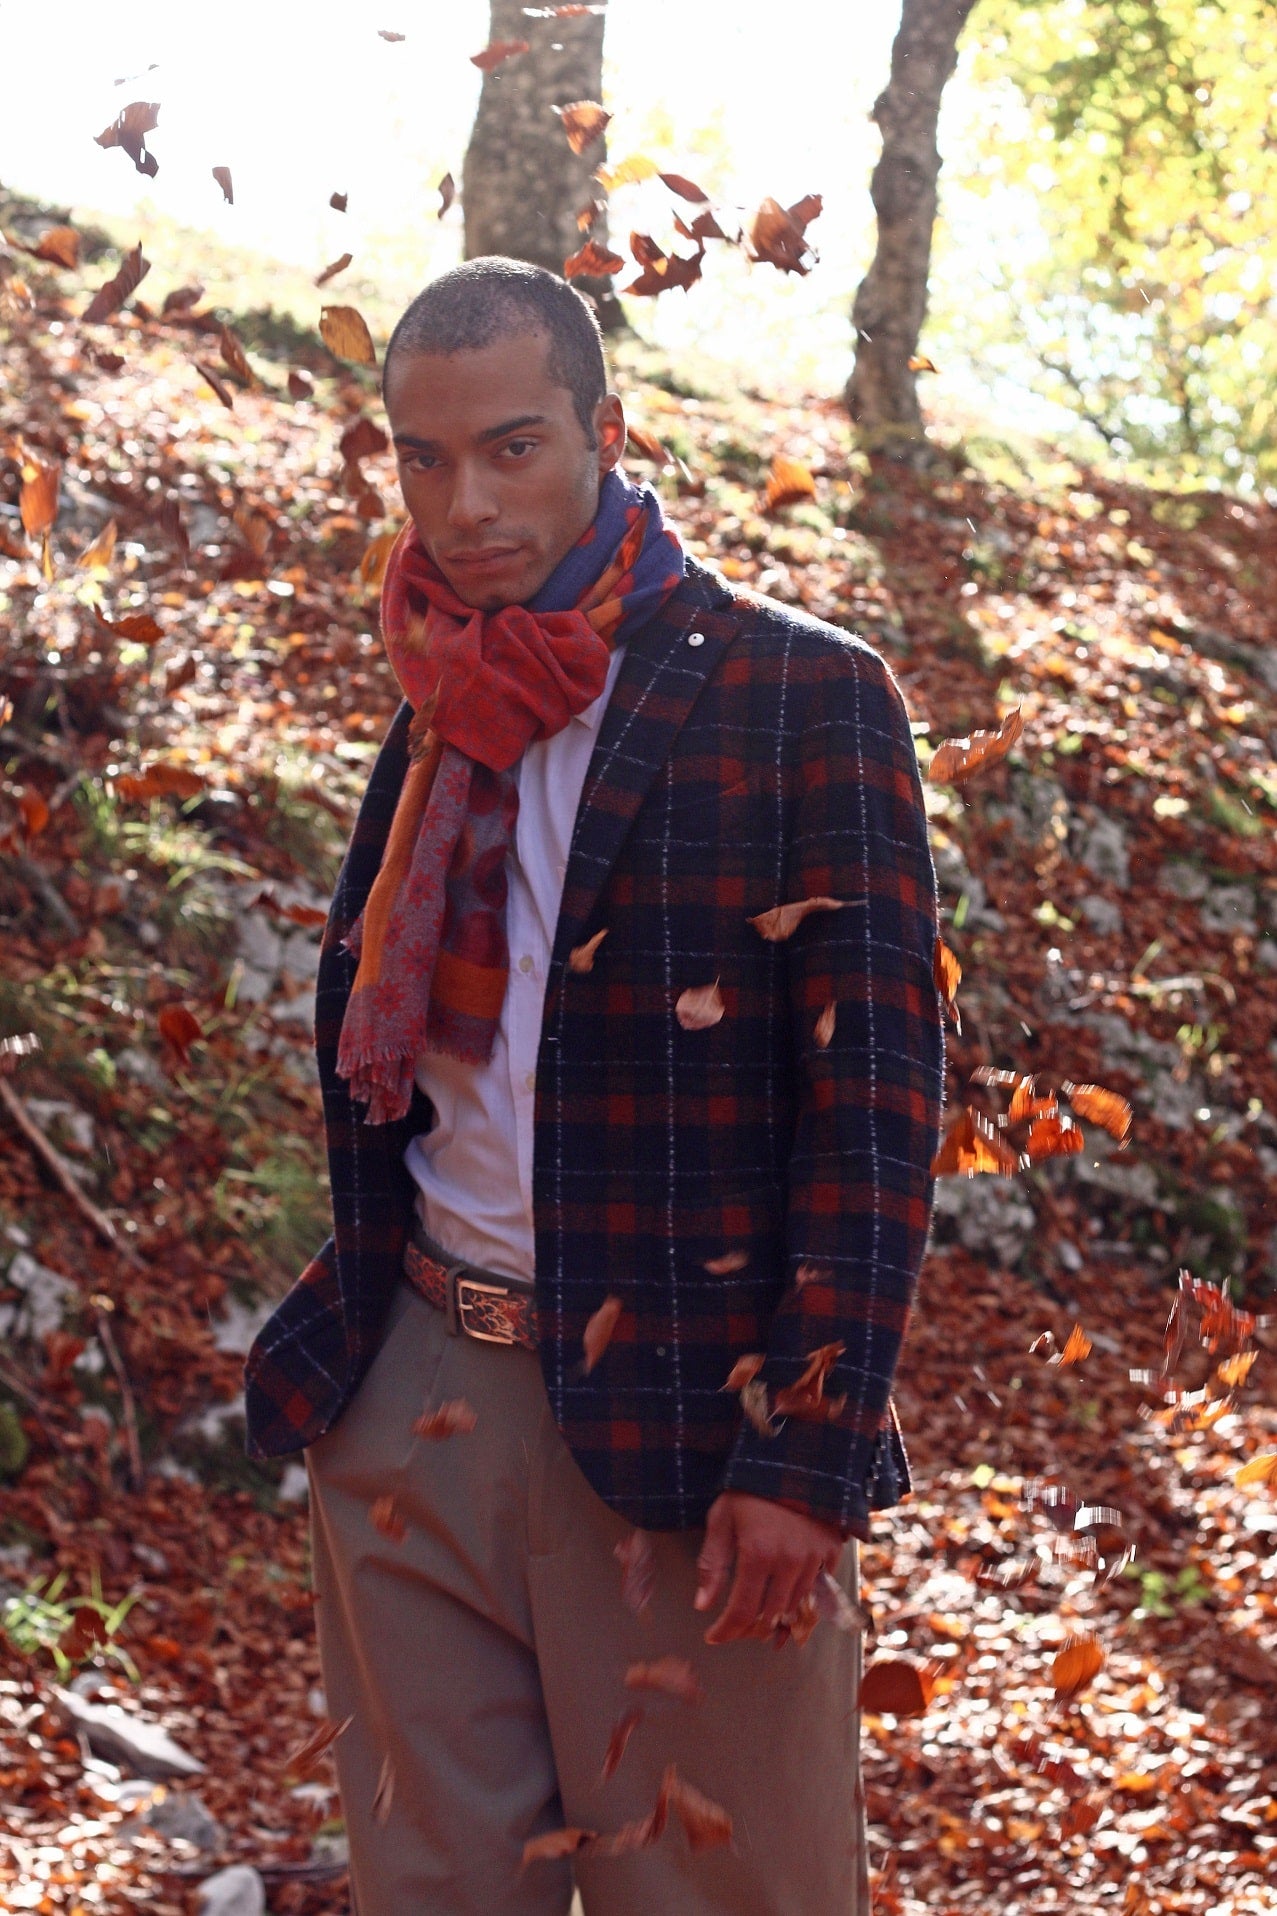 our model during an autumn leaves falling wearing a jacket an orange scarf and an orange painted belt